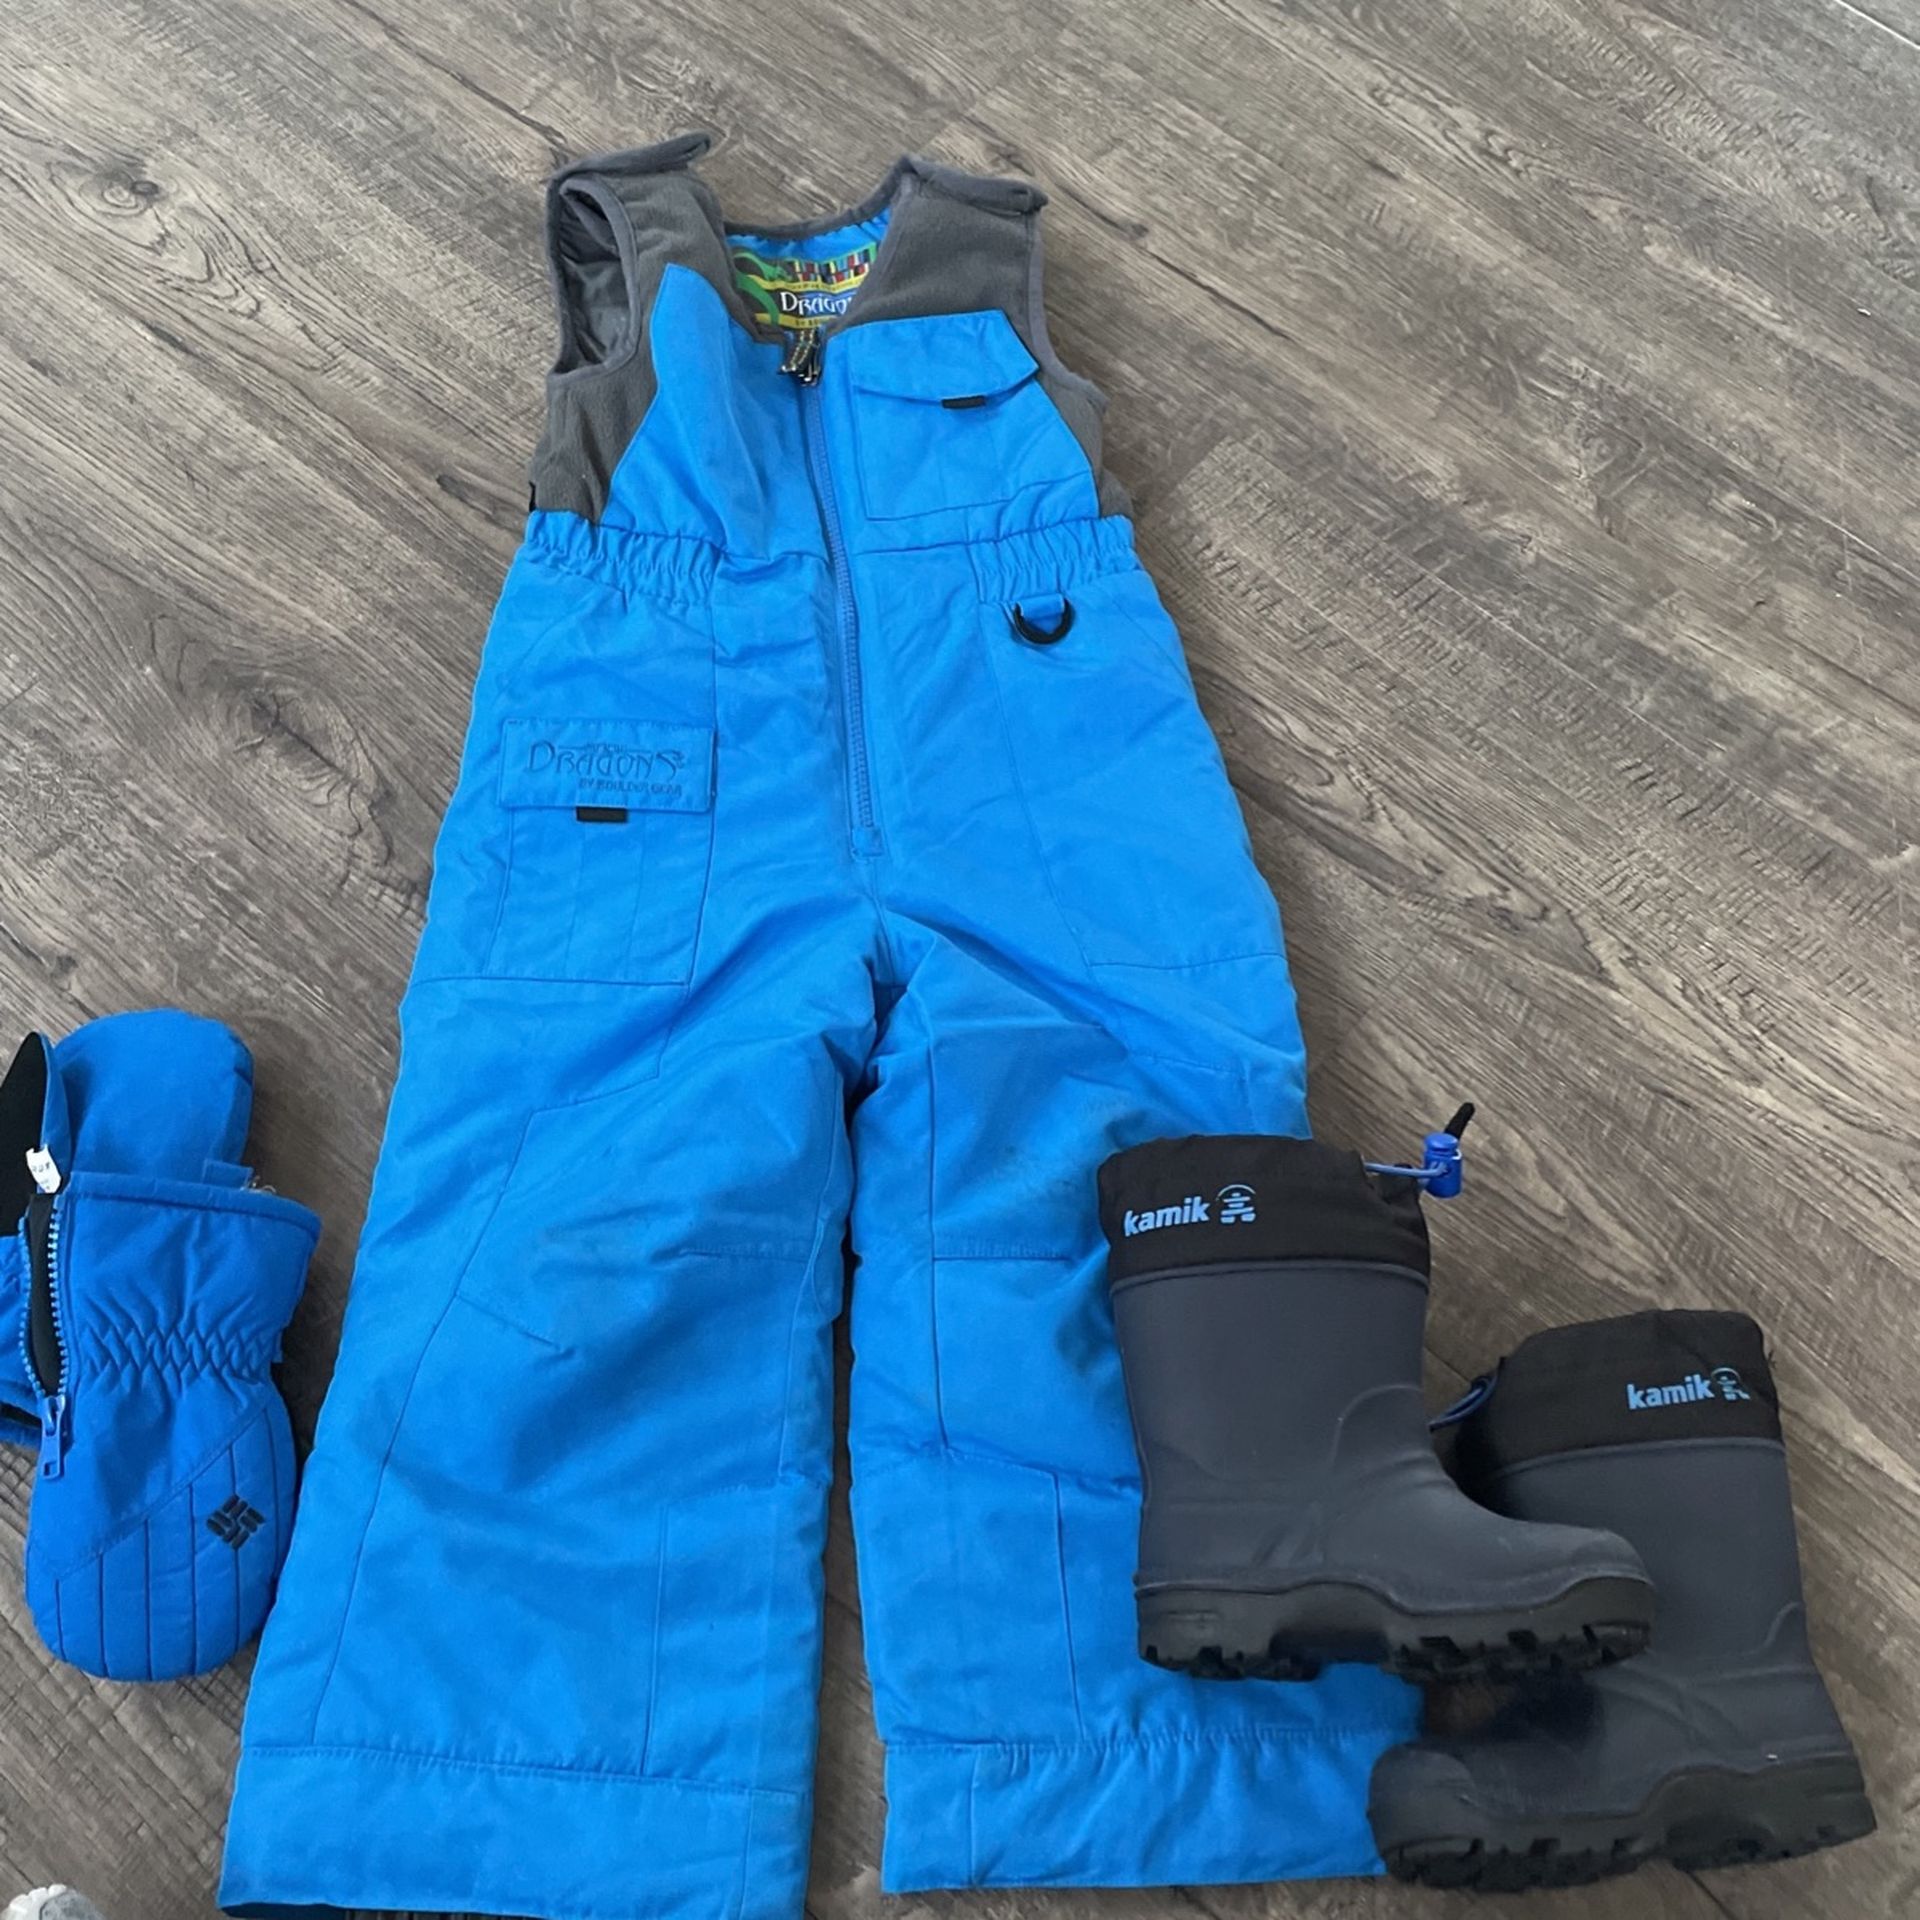 Toddler 3T Snow Bib With Boots And Gloves All Foe $50